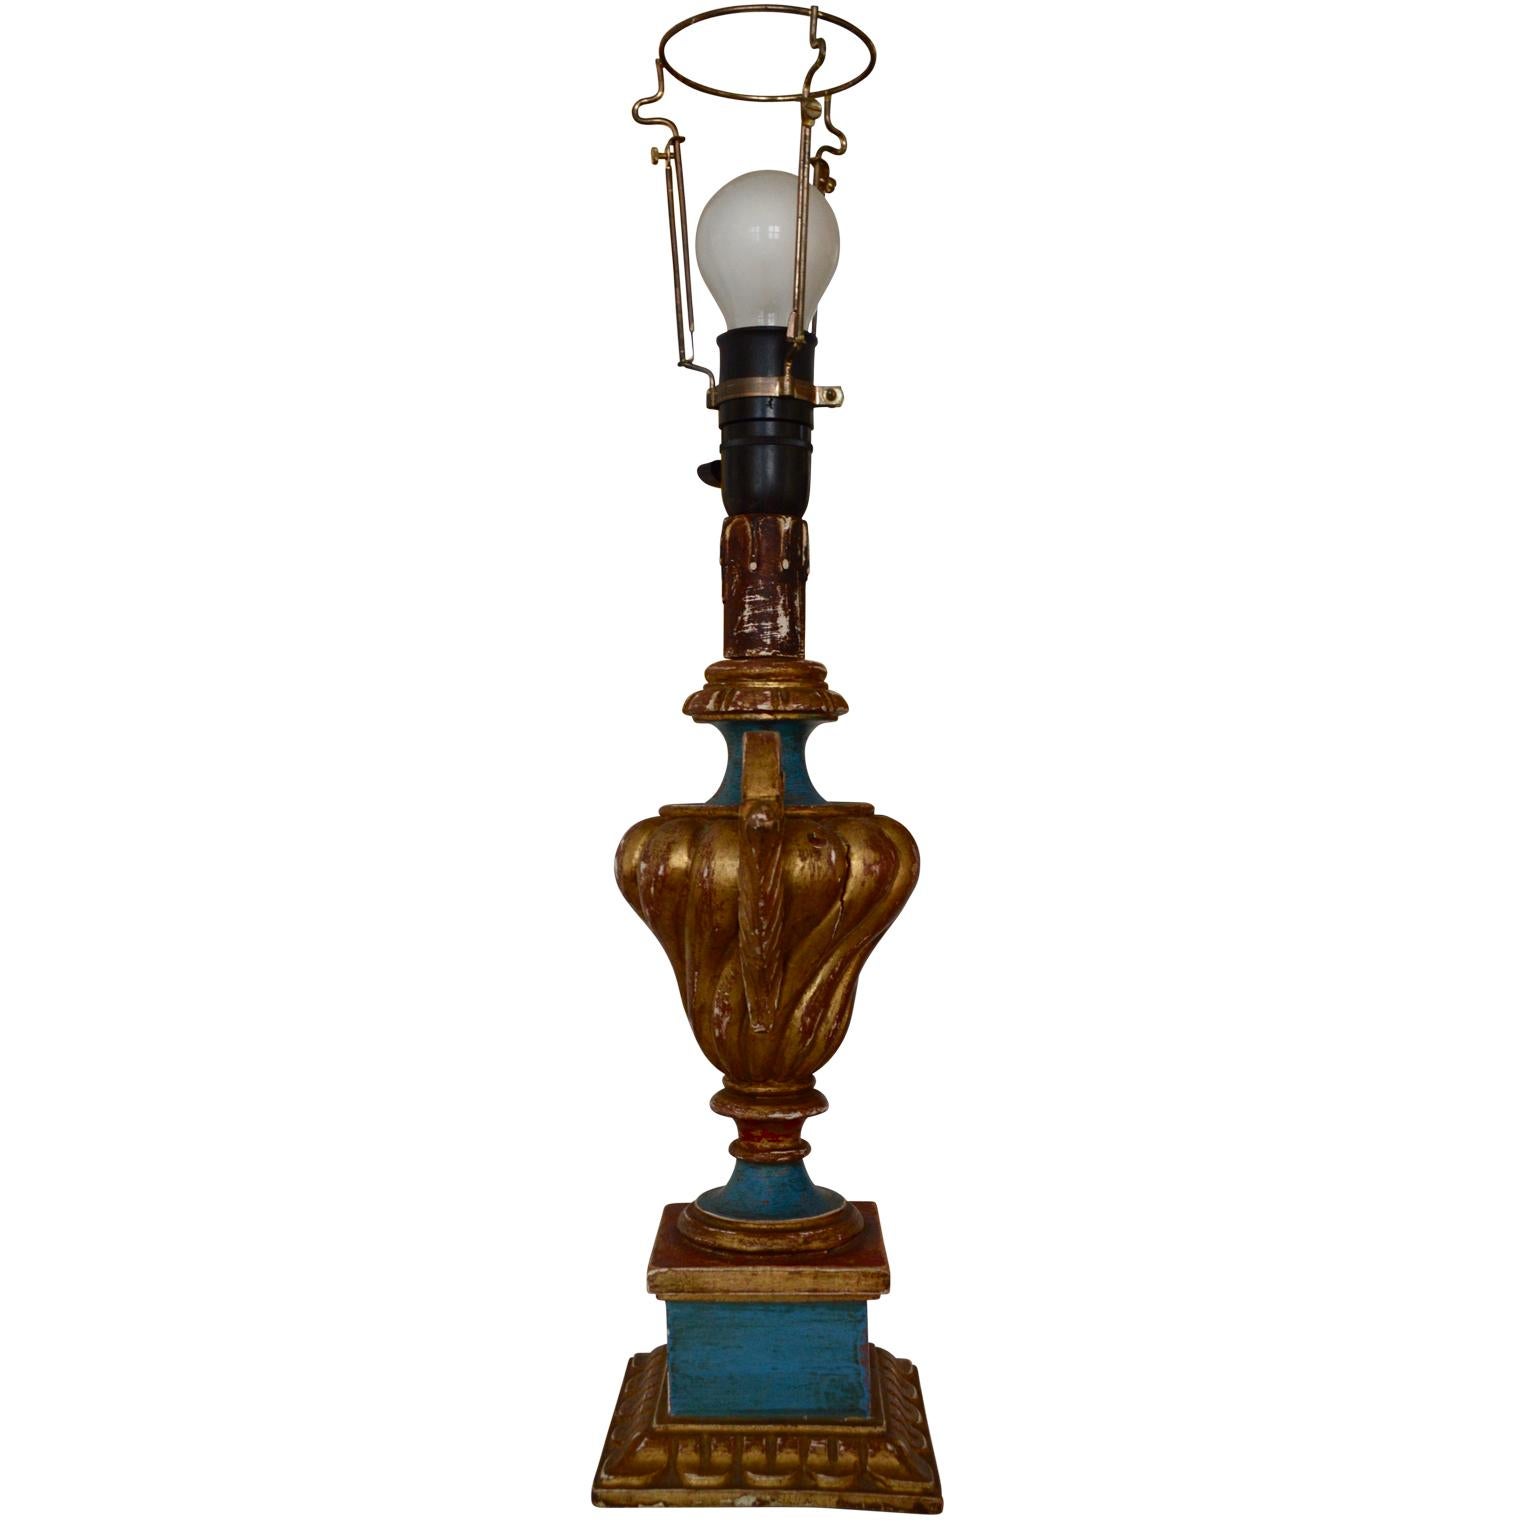 This 19th century Rococo-style, gilded and painted in blue and red table lamp, featuring an decorative urn shaped body with side handles carved in wood. The lamp is raised on a square base.